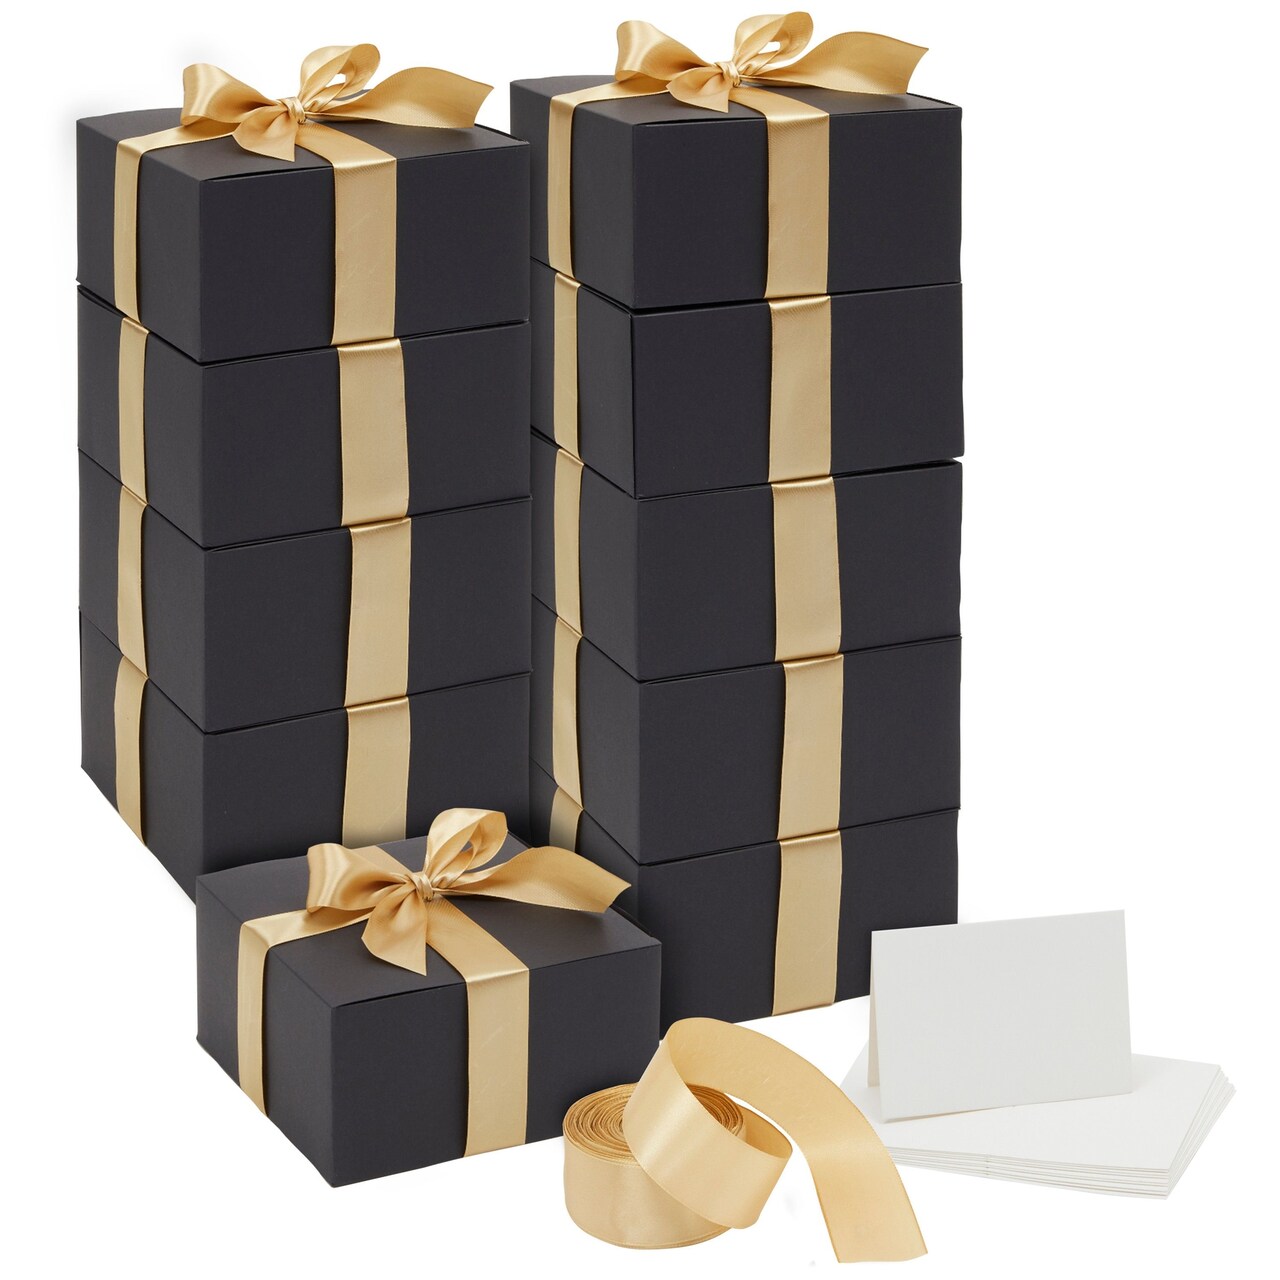 10 Pack Black Gift Boxes with Lids, Ribbon and Blank White Greeting Cards for Presents, Favors (8x8x4 in)